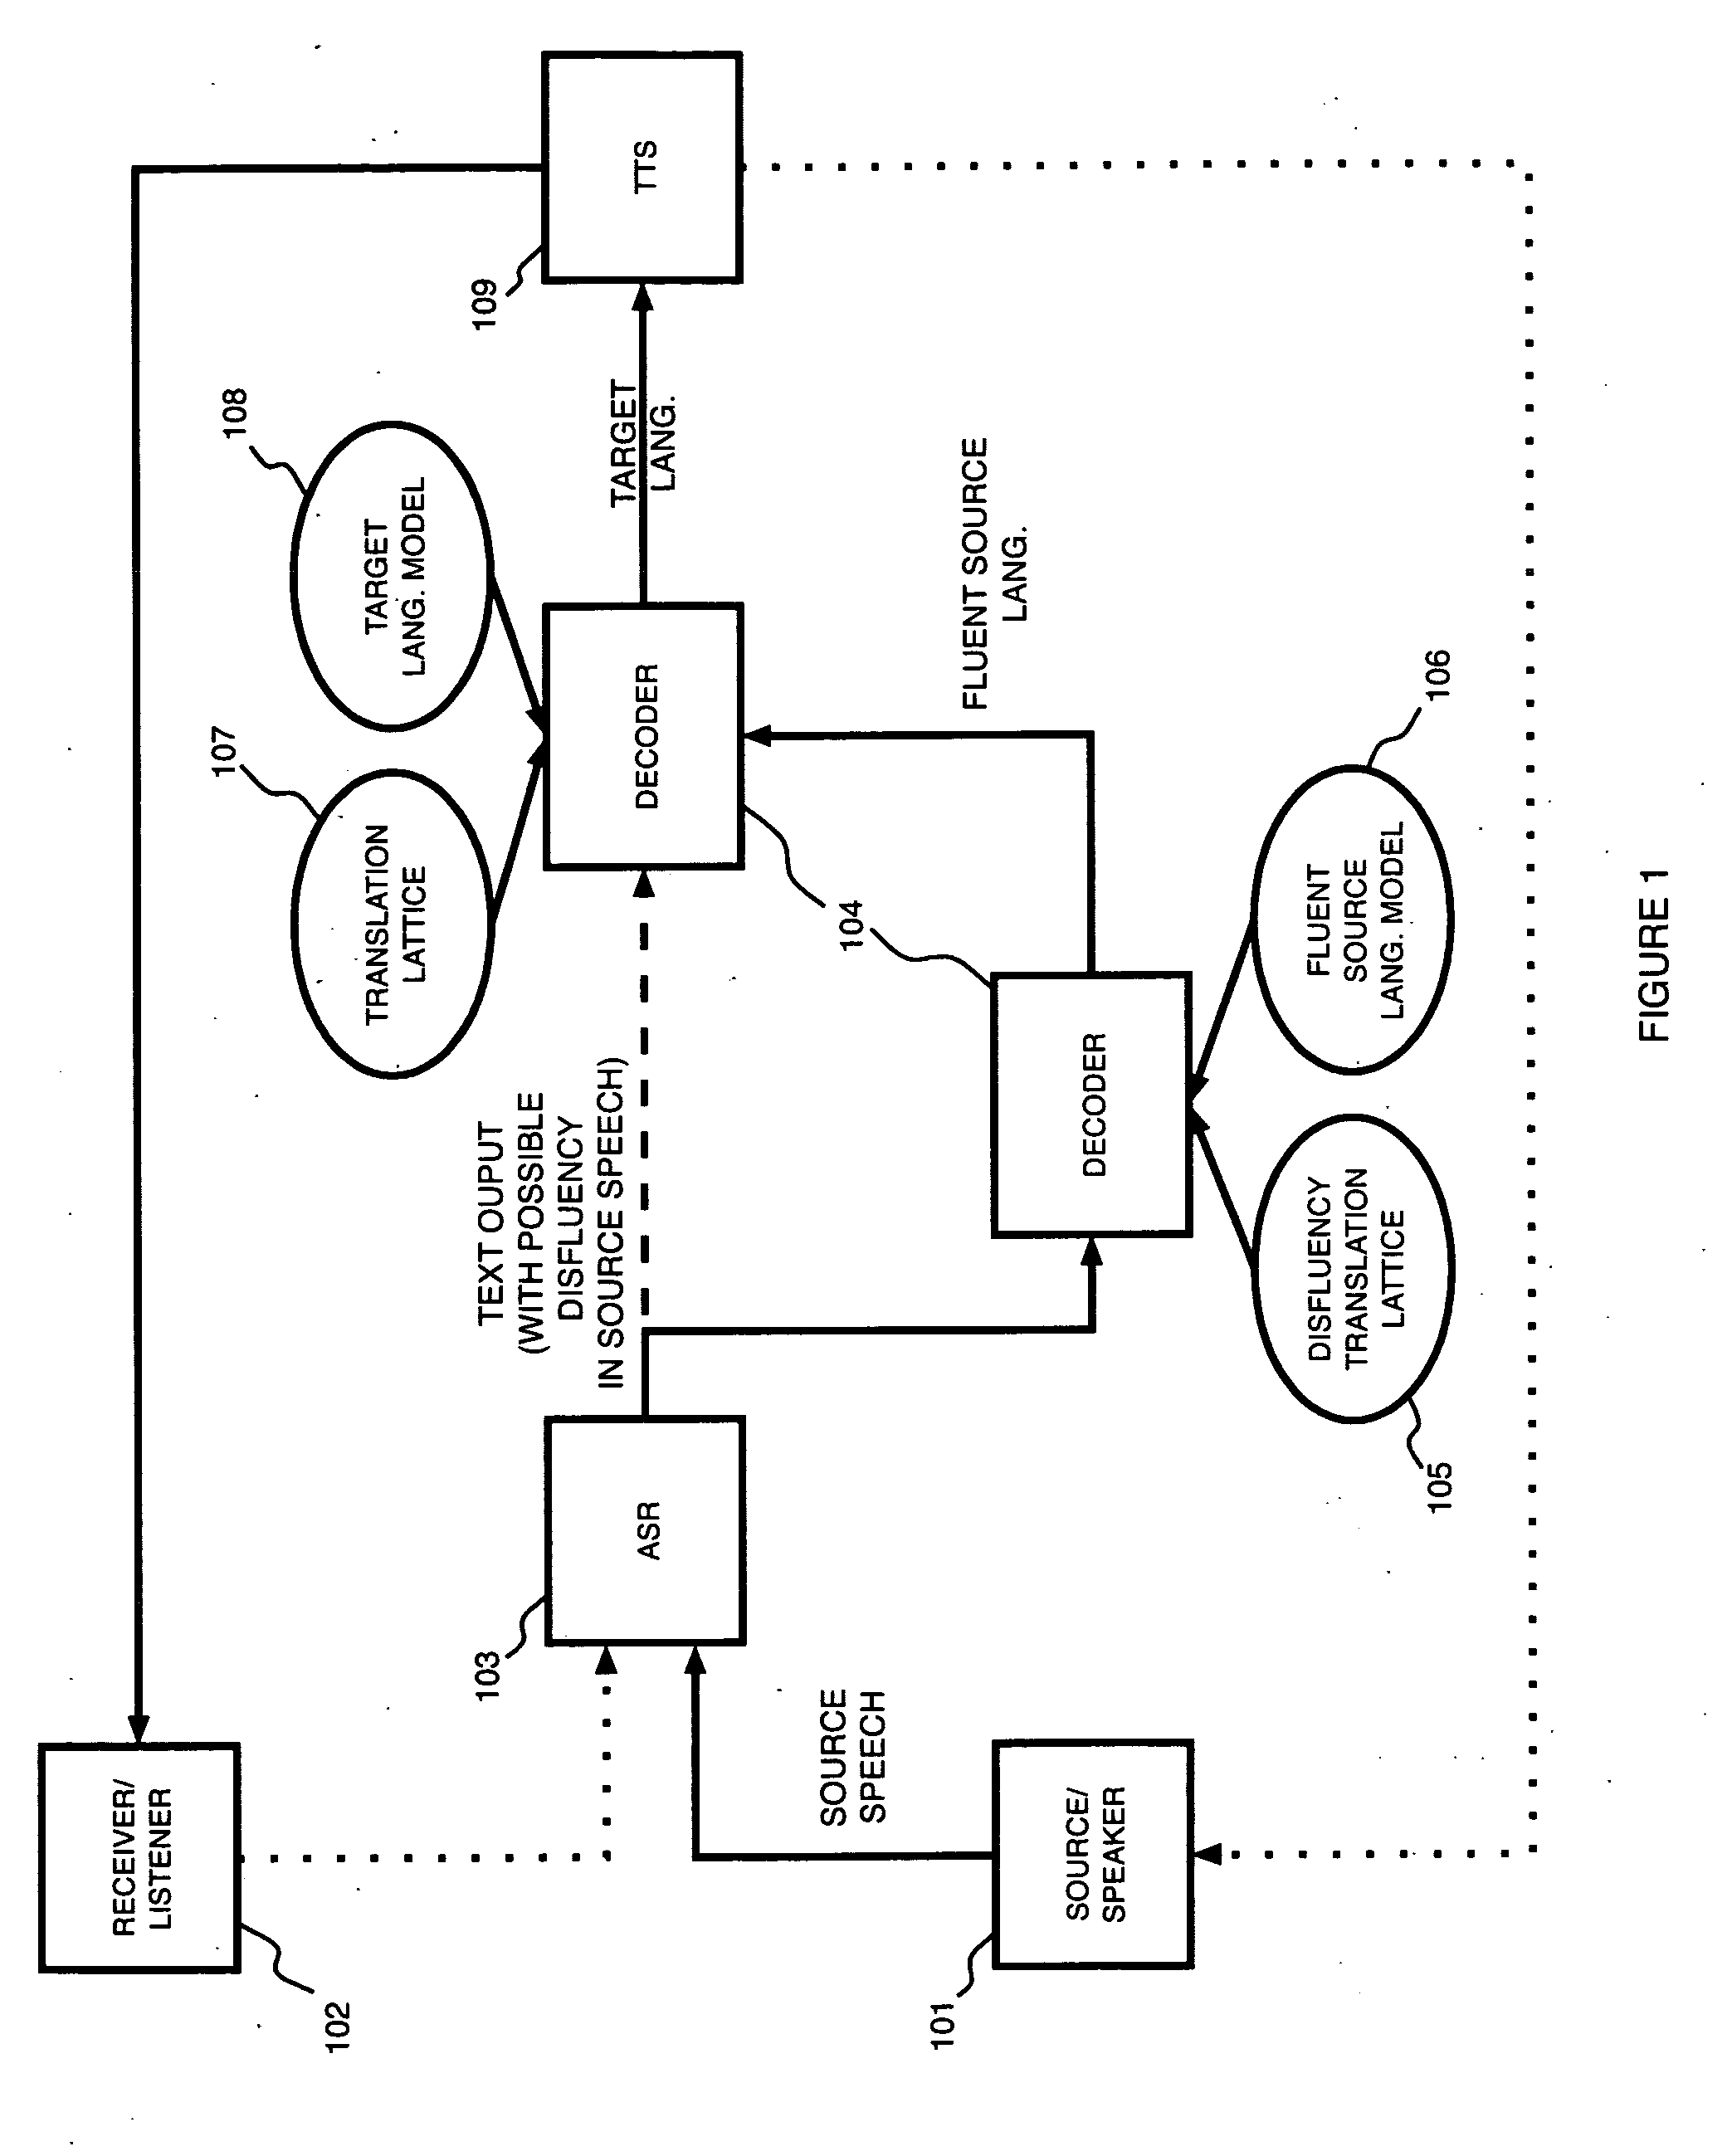 Disfluency detection for a speech-to-speech translation system using phrase-level machine translation with weighted finite state transducers